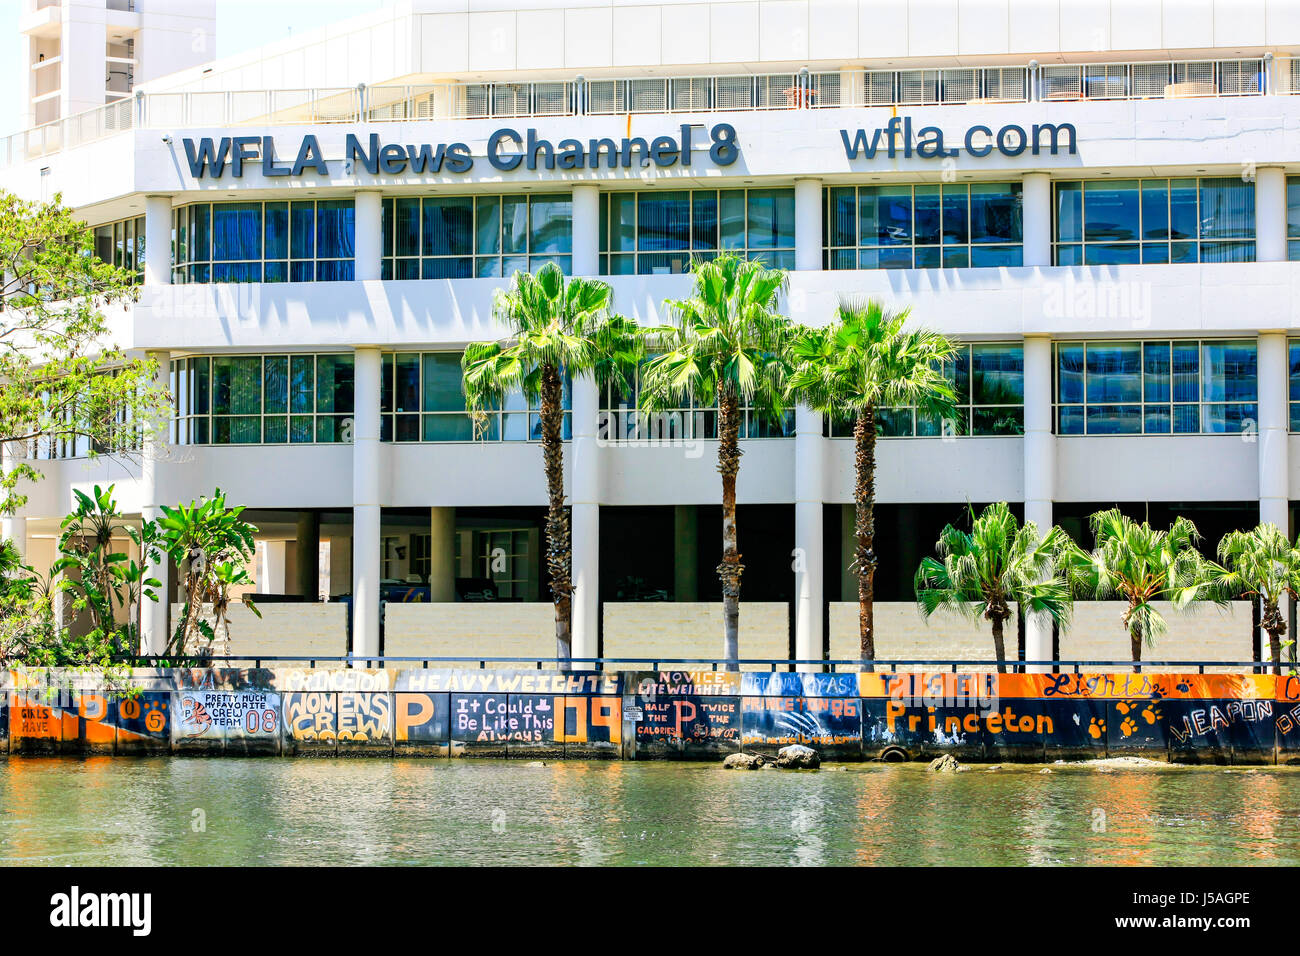 The WFLA News Channel 8 building on the Hillsboro River in downtown Tampa, FL Stock Photo